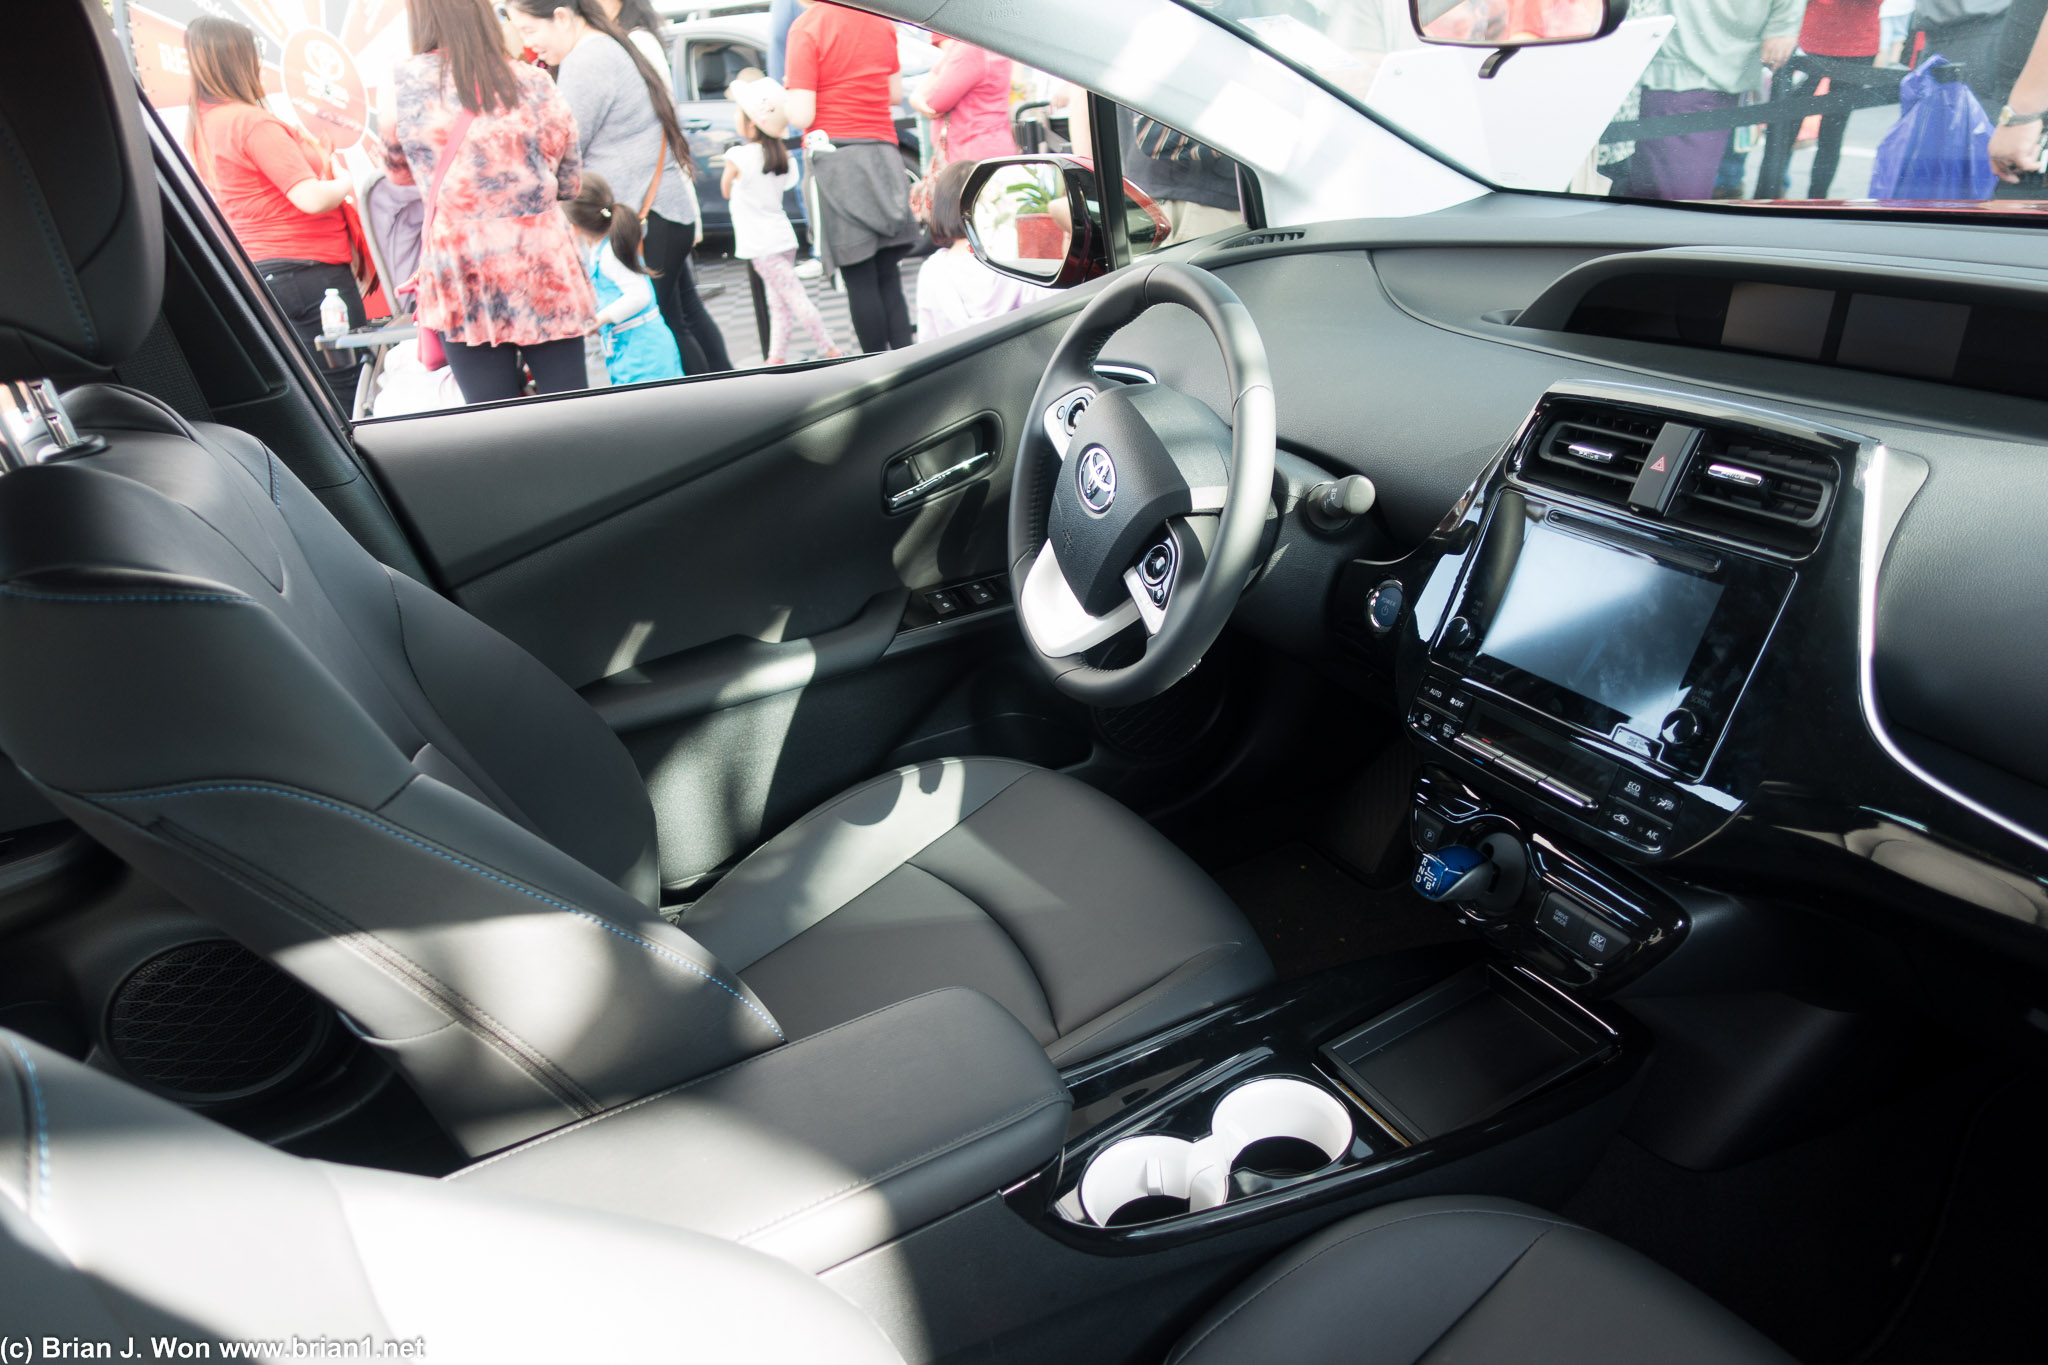 Inside of the new Prius.